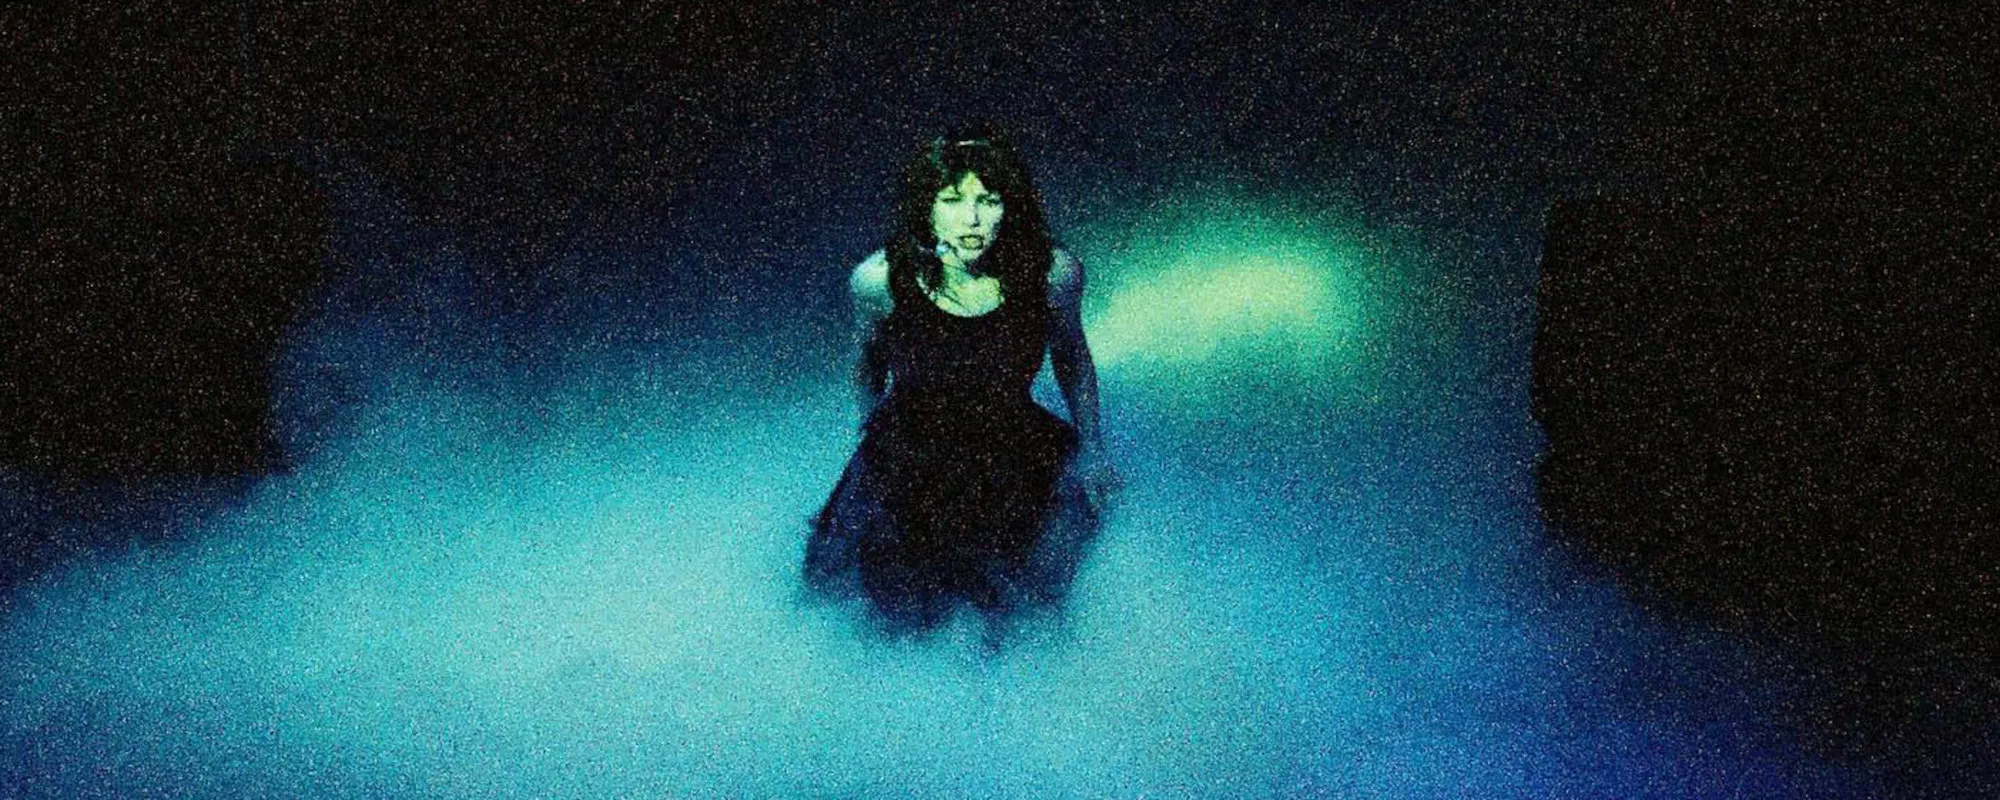 The Meaning Behind Kate Bush’s 1985 Classic “Running Up That Hill”